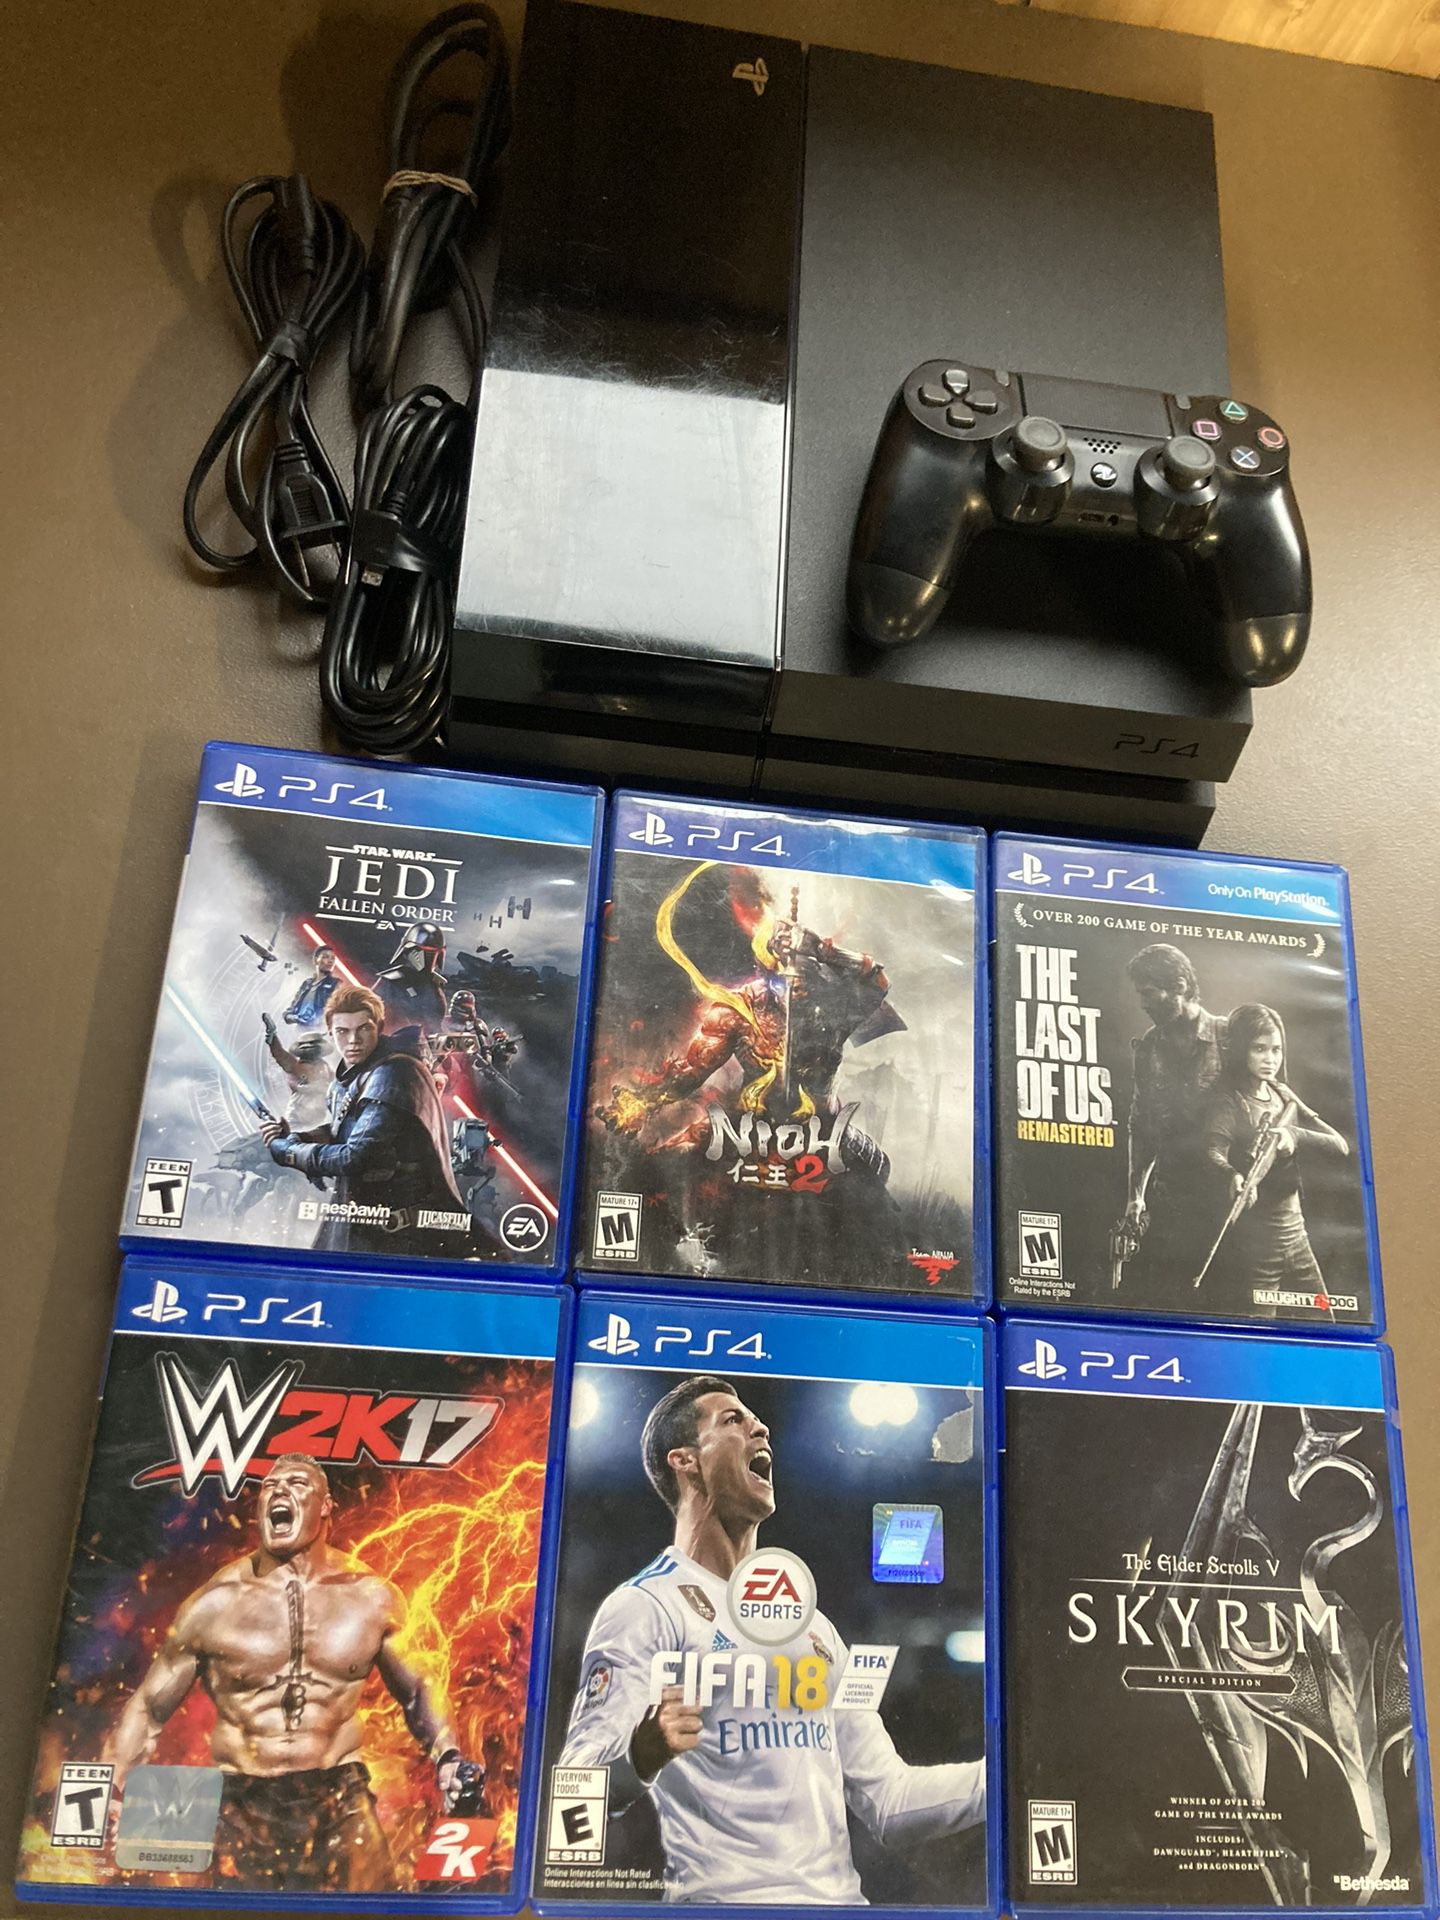 Play Station 4 500GB PS4 Comes With 6 Games Wires And Controller ReadyToPlay